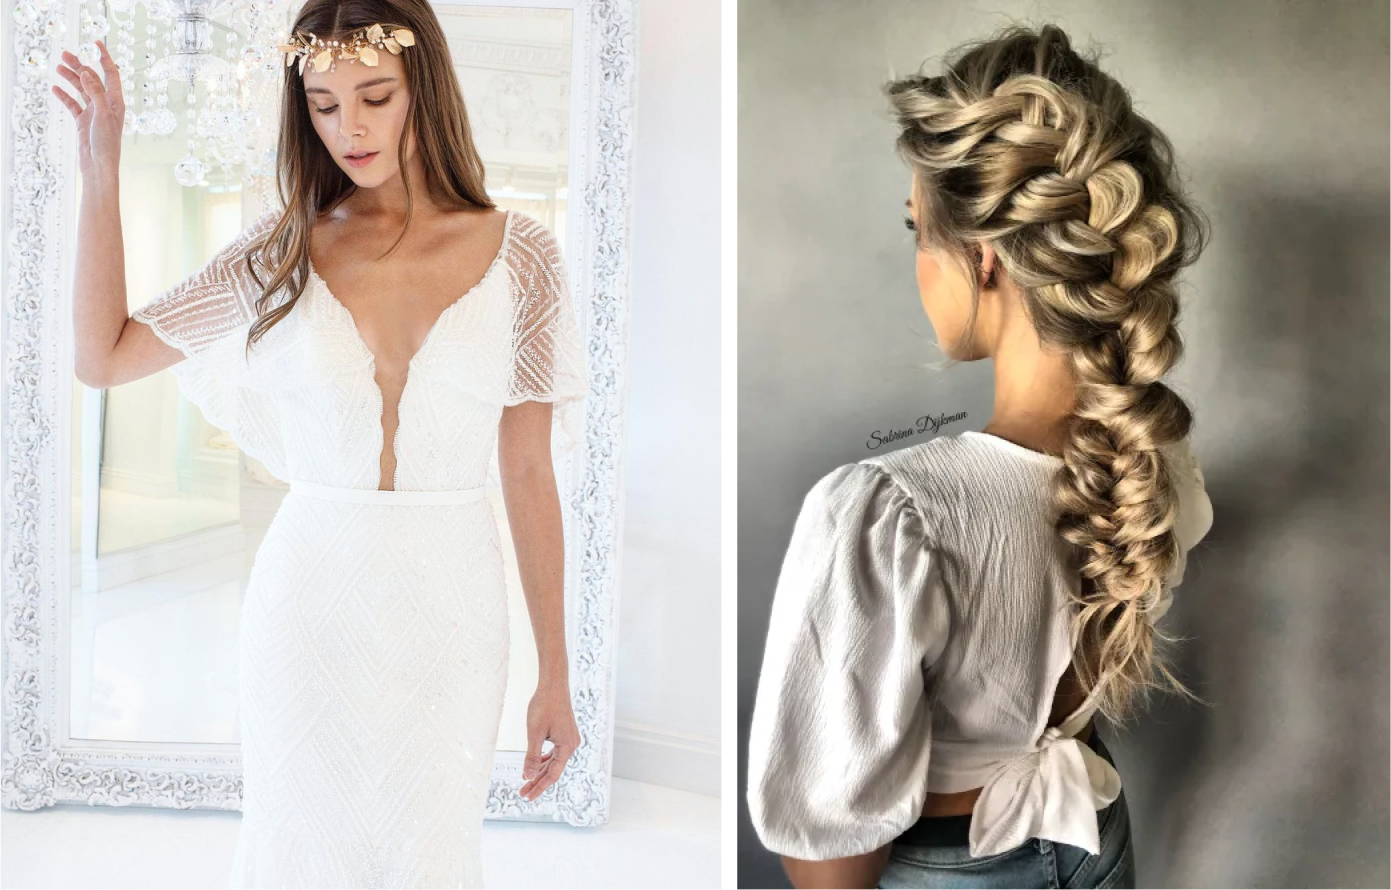 37 Wedding Guest Hairstyles for a Red Carpet-Inspired Look | Vogue